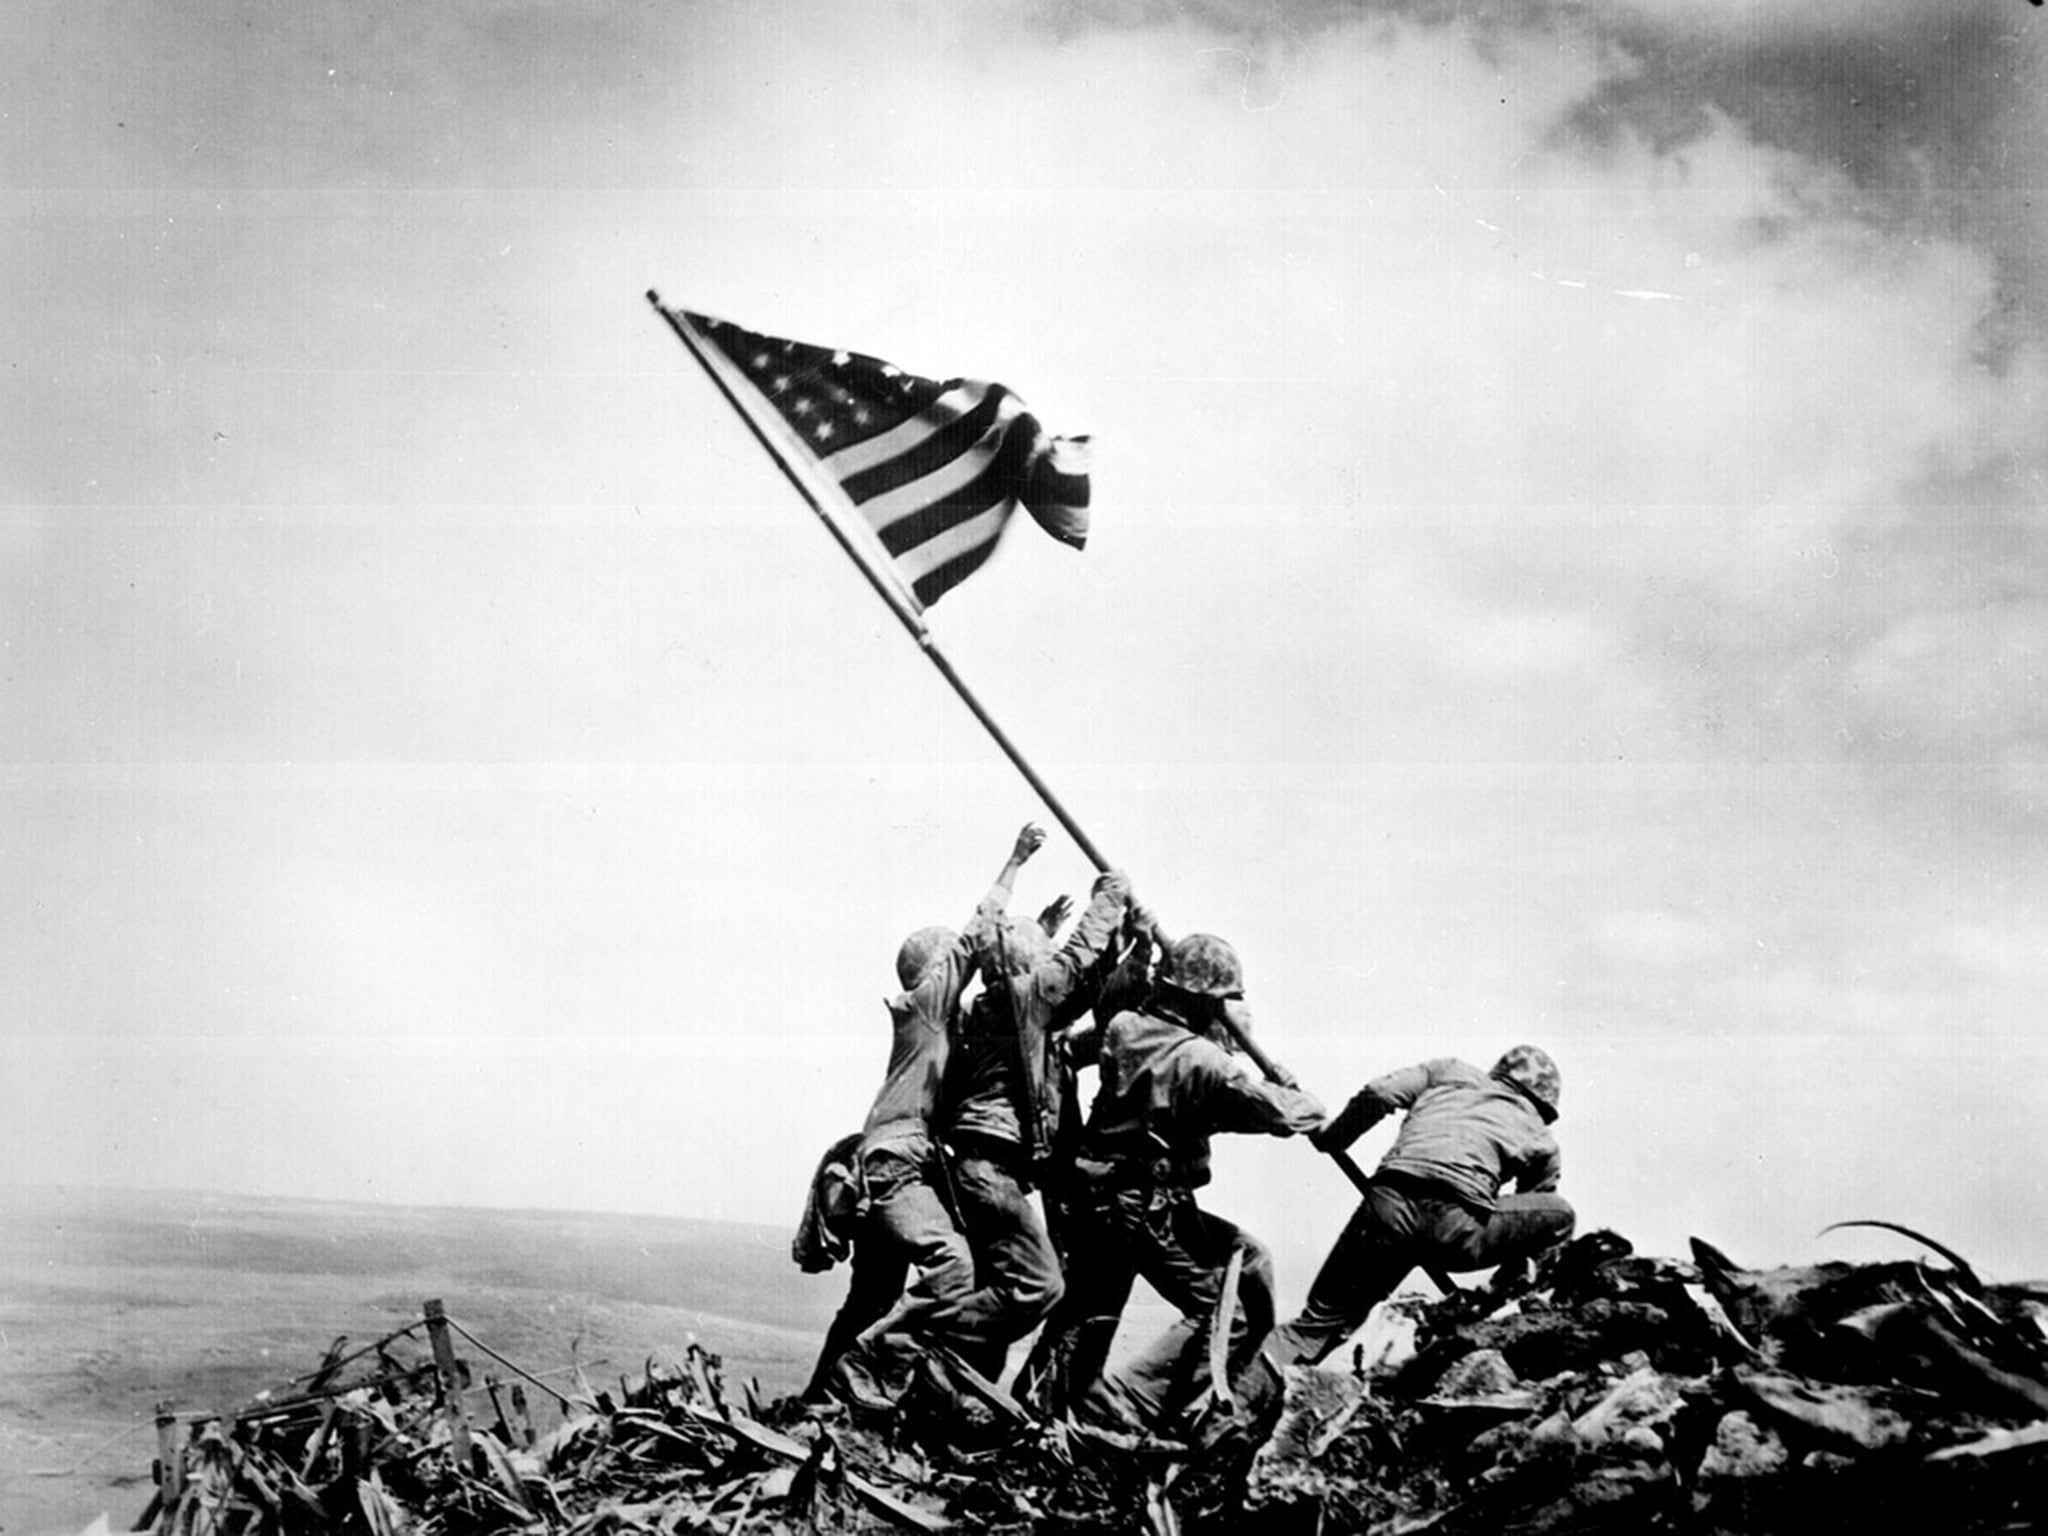 US Marines raise a flag atop Mount Suribachi during the Battle of Iwo Jima in WWII, 23 February 1945